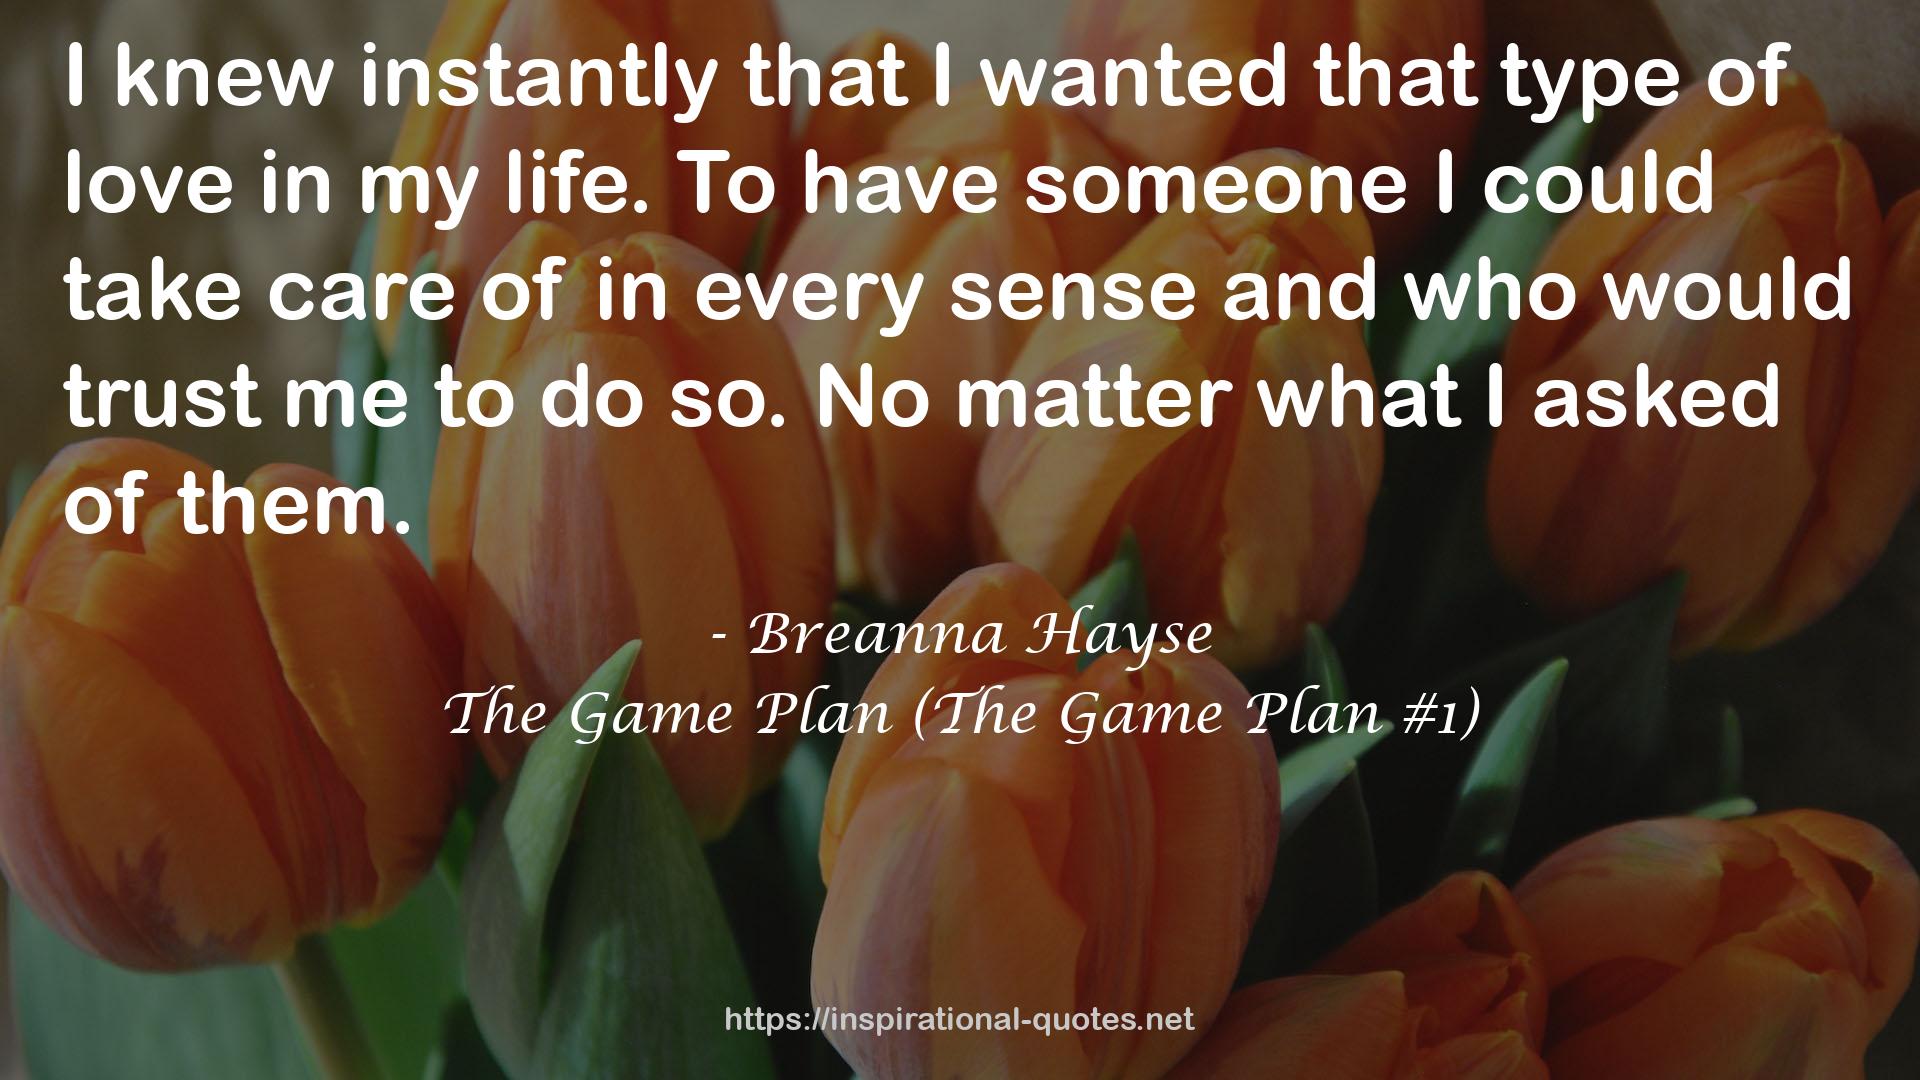 The Game Plan (The Game Plan #1) QUOTES